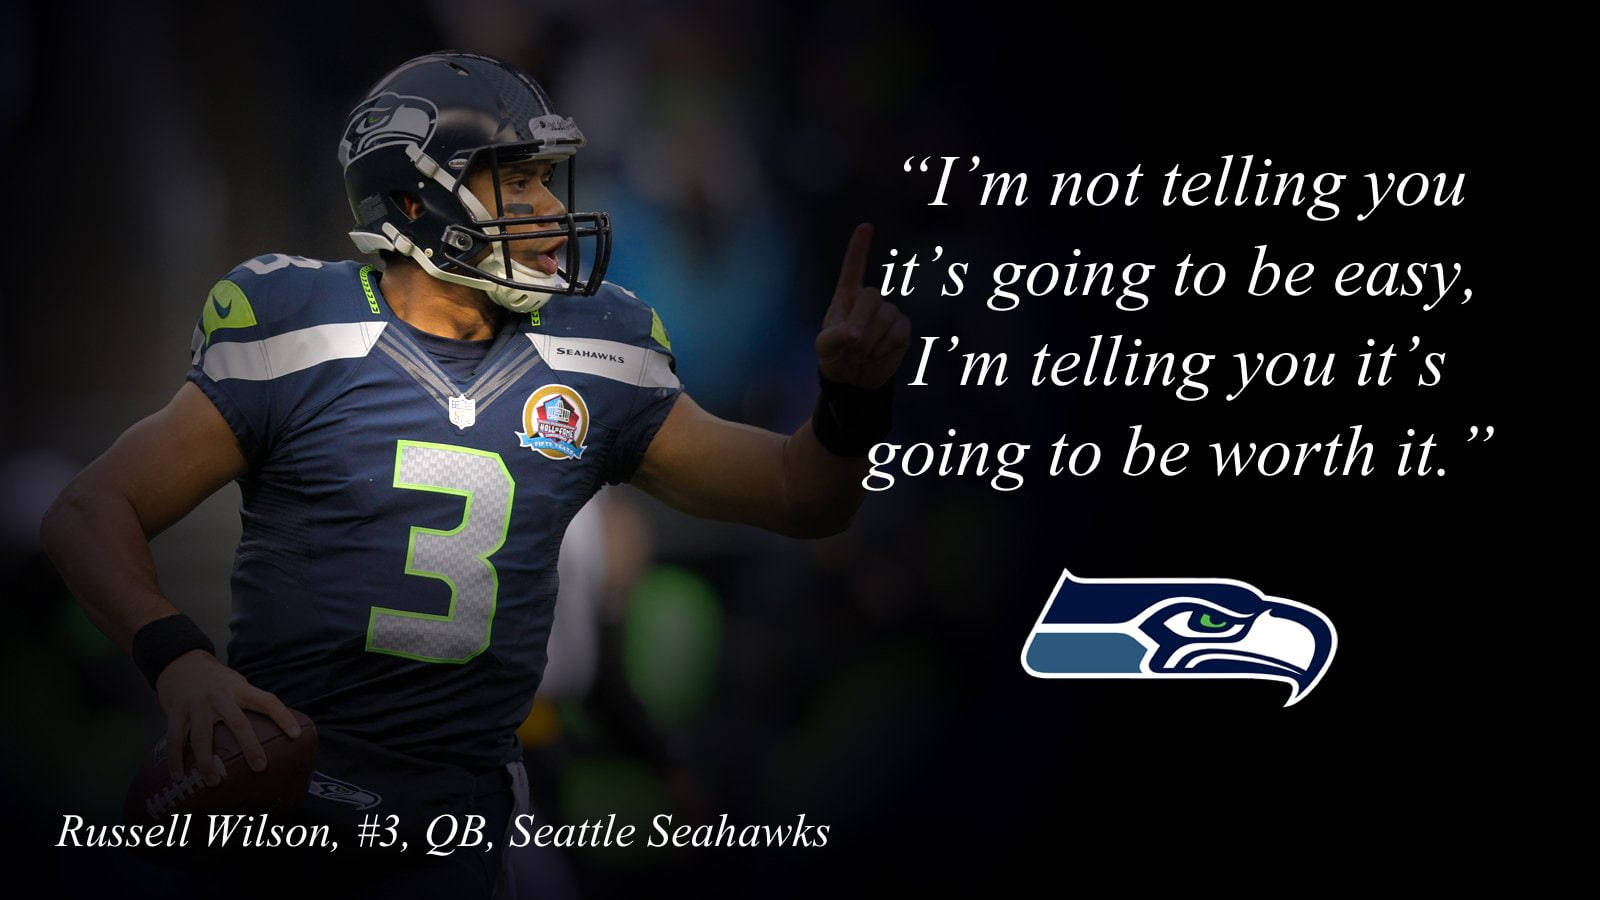 Seattle Seahawks Russel Wilson Quote Background